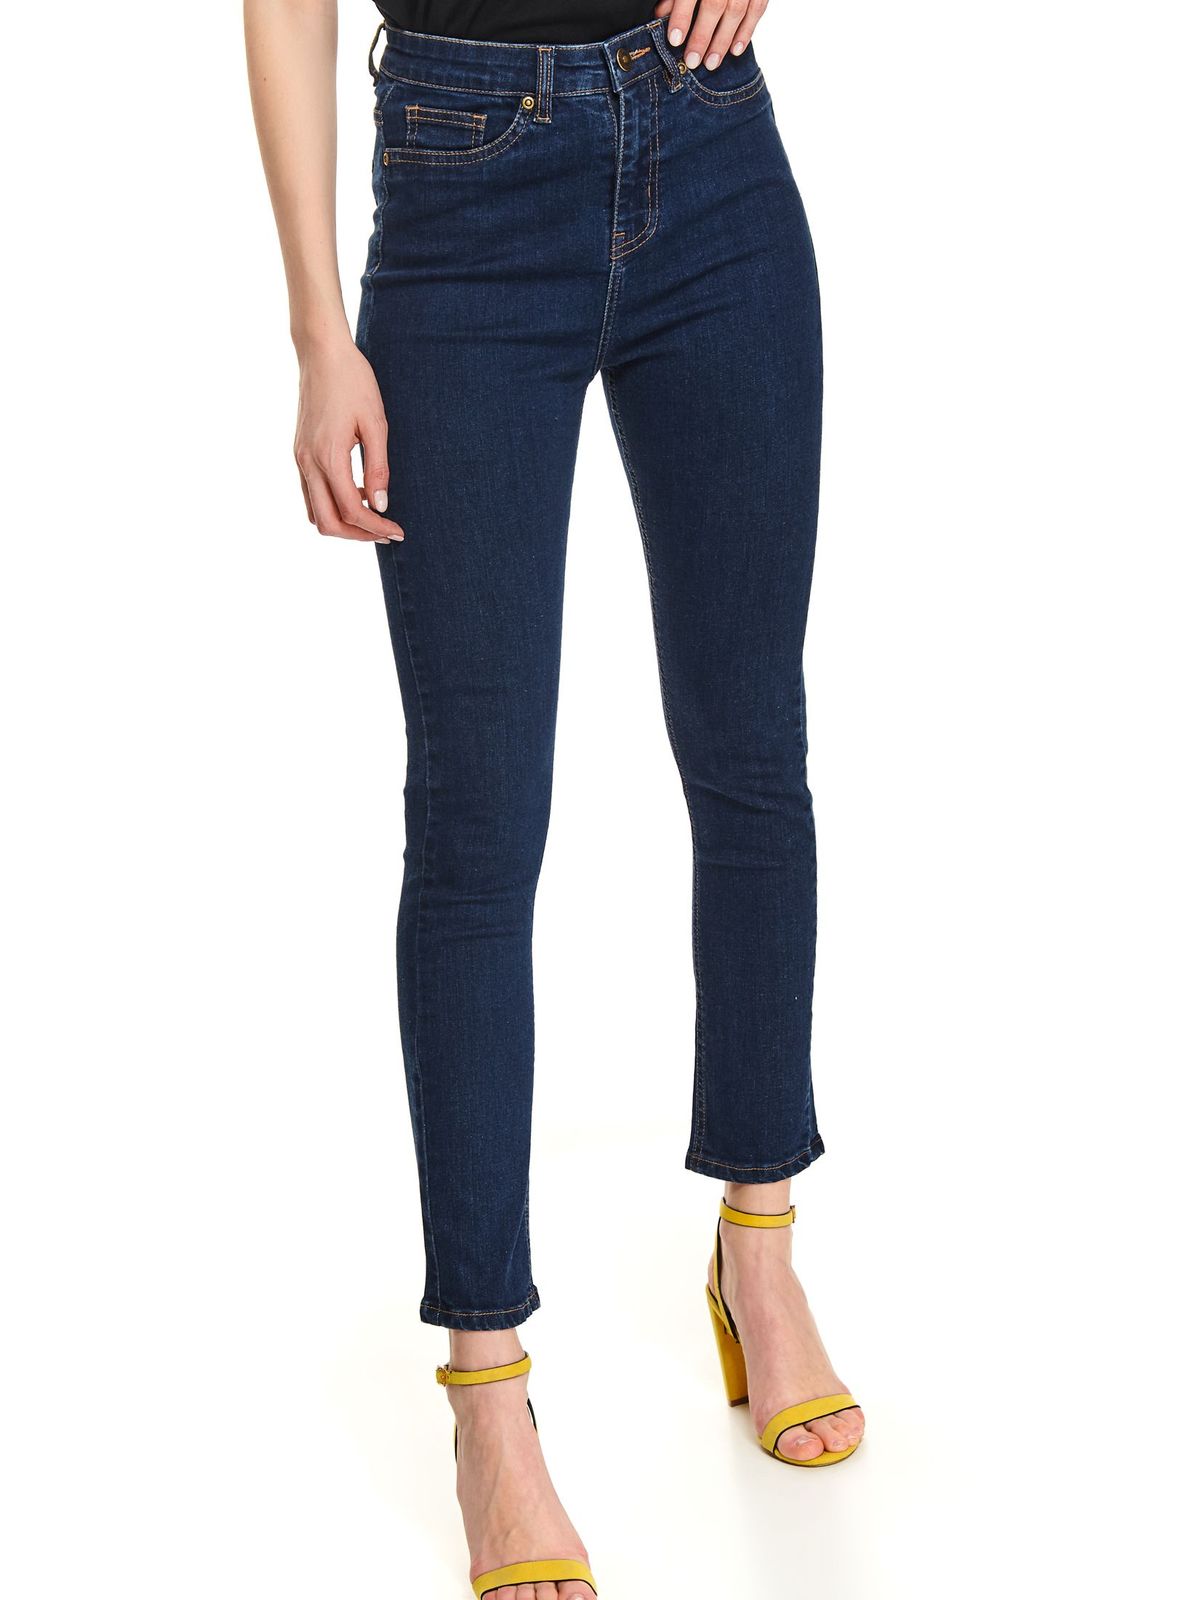 Blue trousers casual denim high waisted with pockets